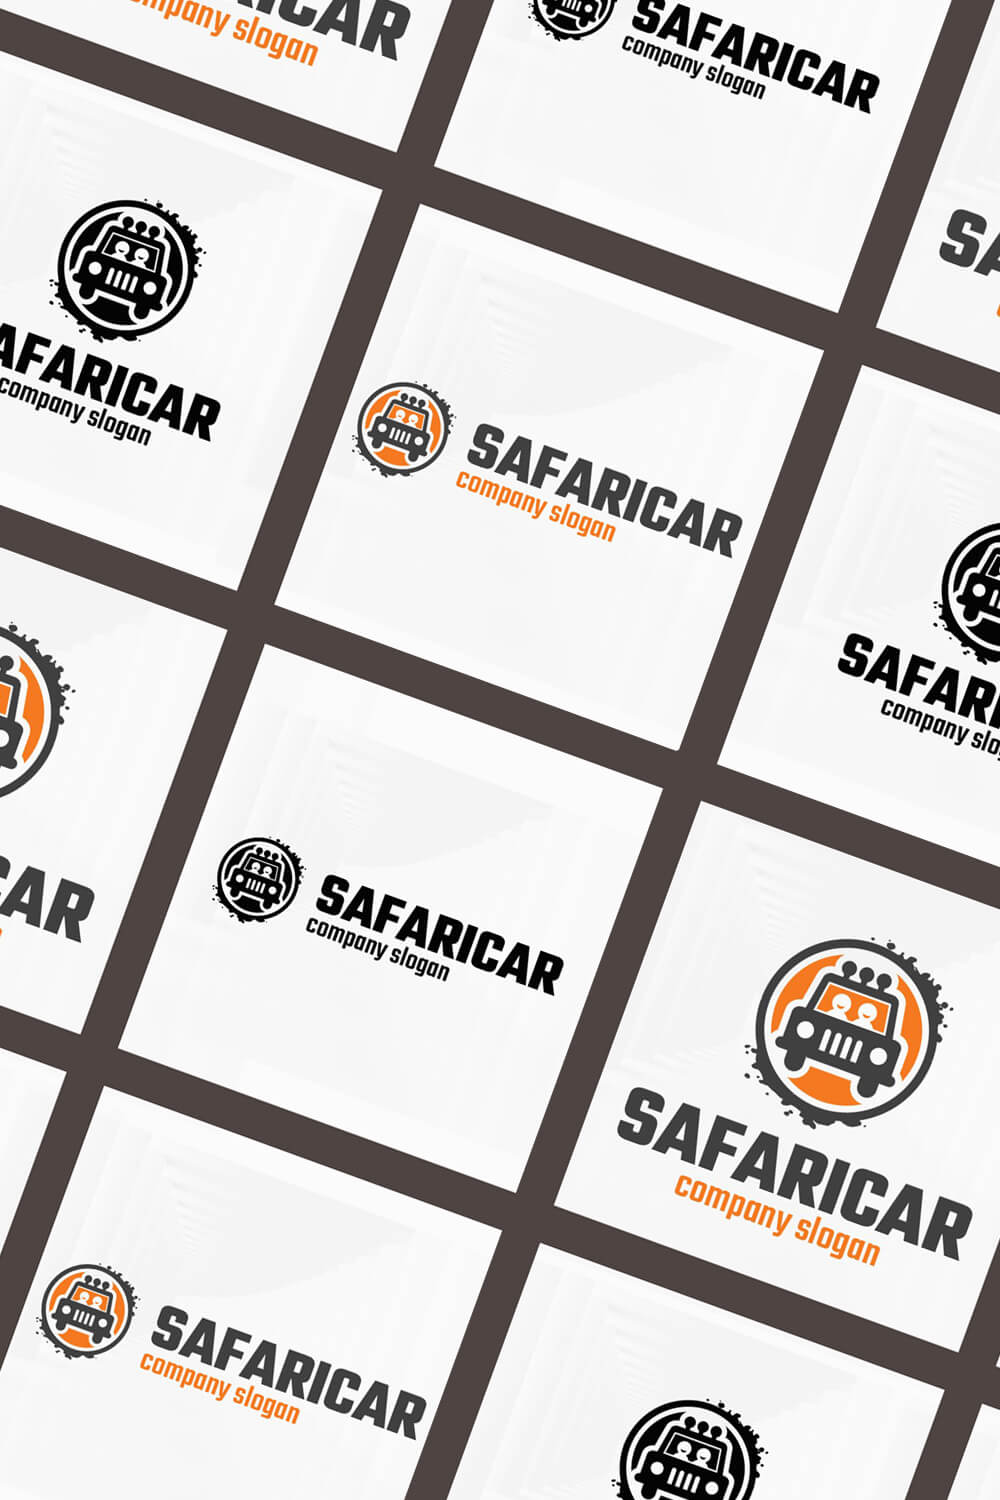 Many Safari car logo templates in squares on a brown background.